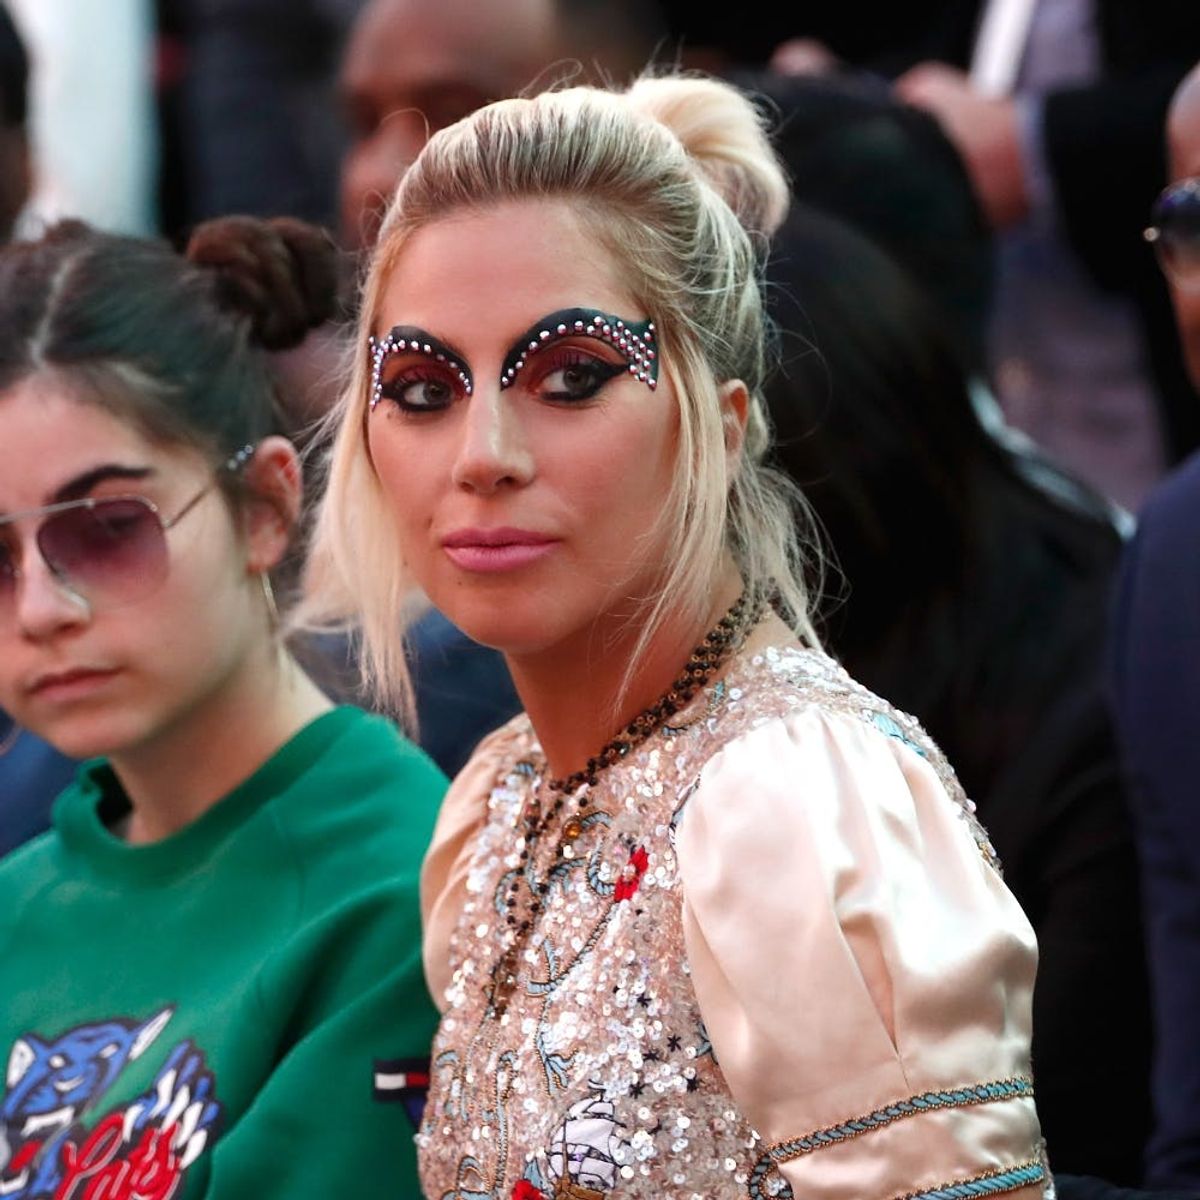 Lady Gaga Explains Why She “Couldn’t Ignore” the Body-Shaming